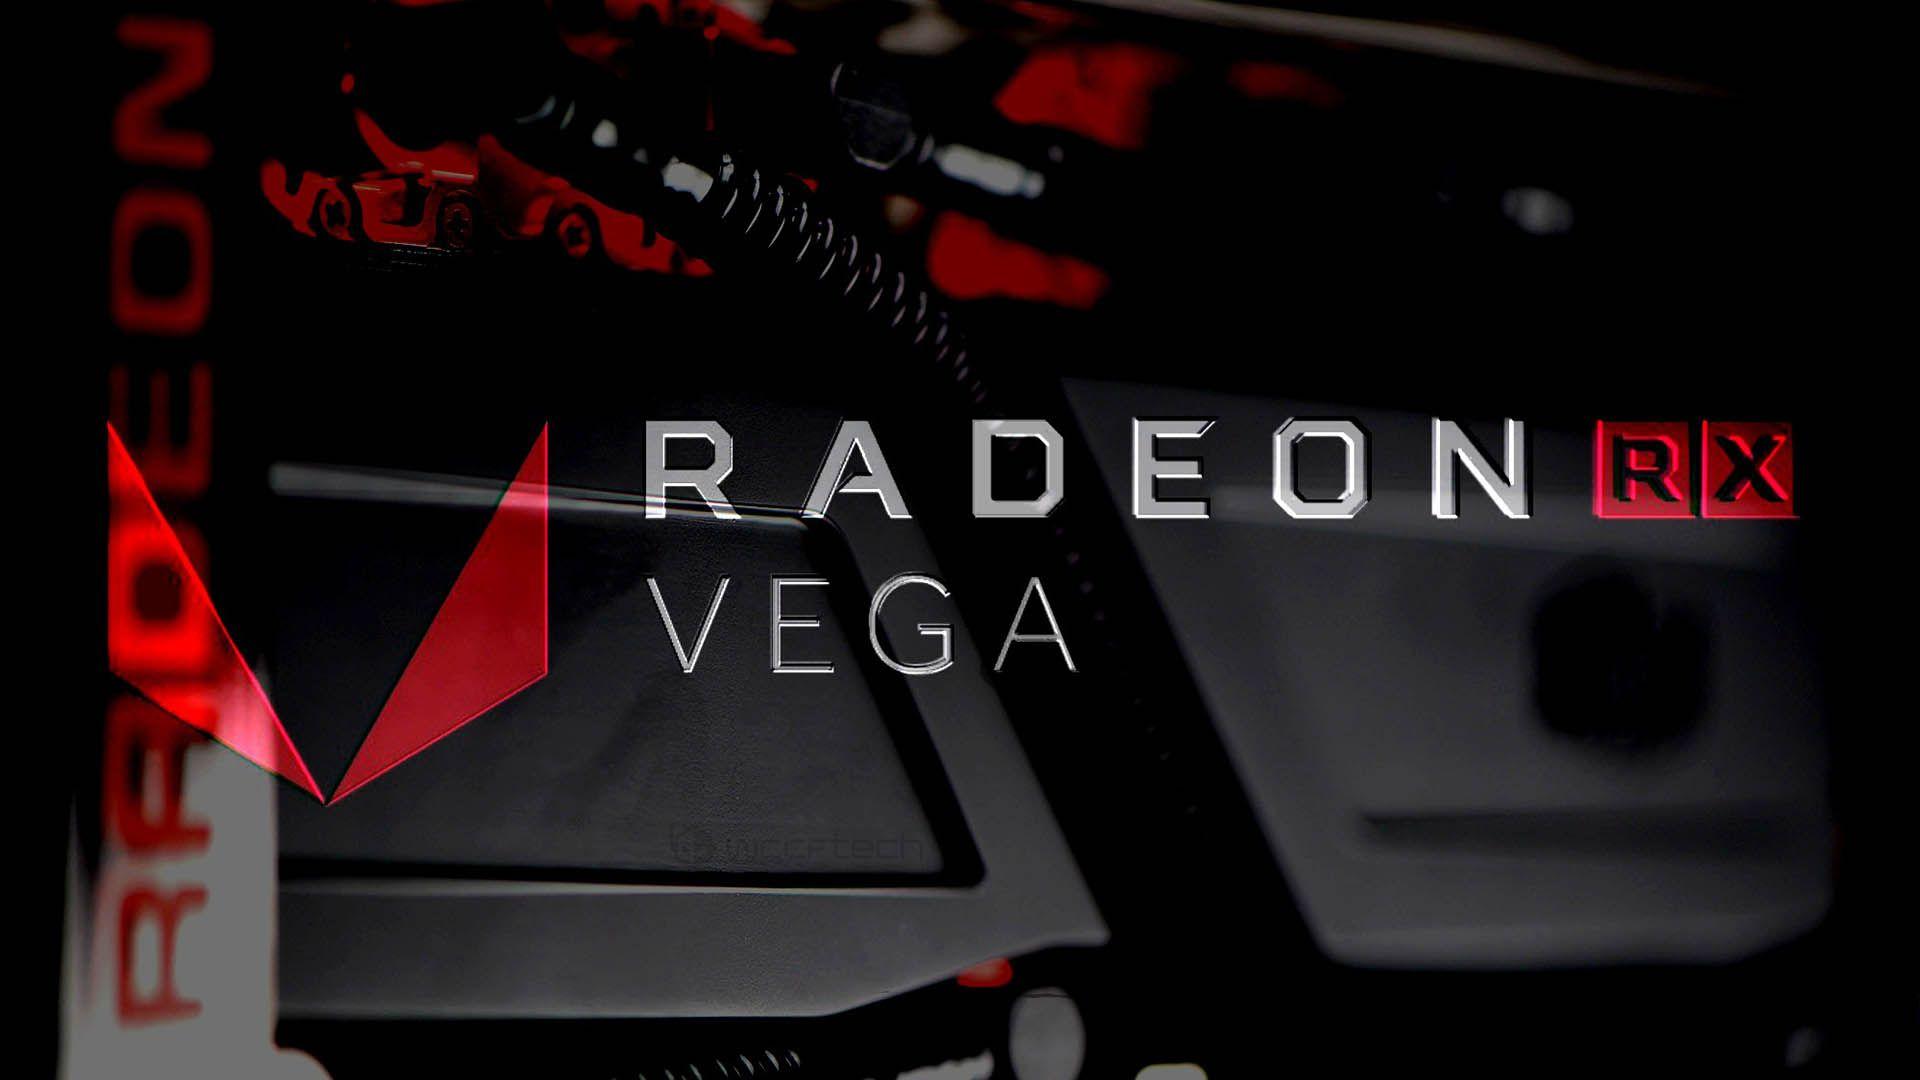 AMD RX Vega x2 Card Allegedly Coming, To Be World's Fastest